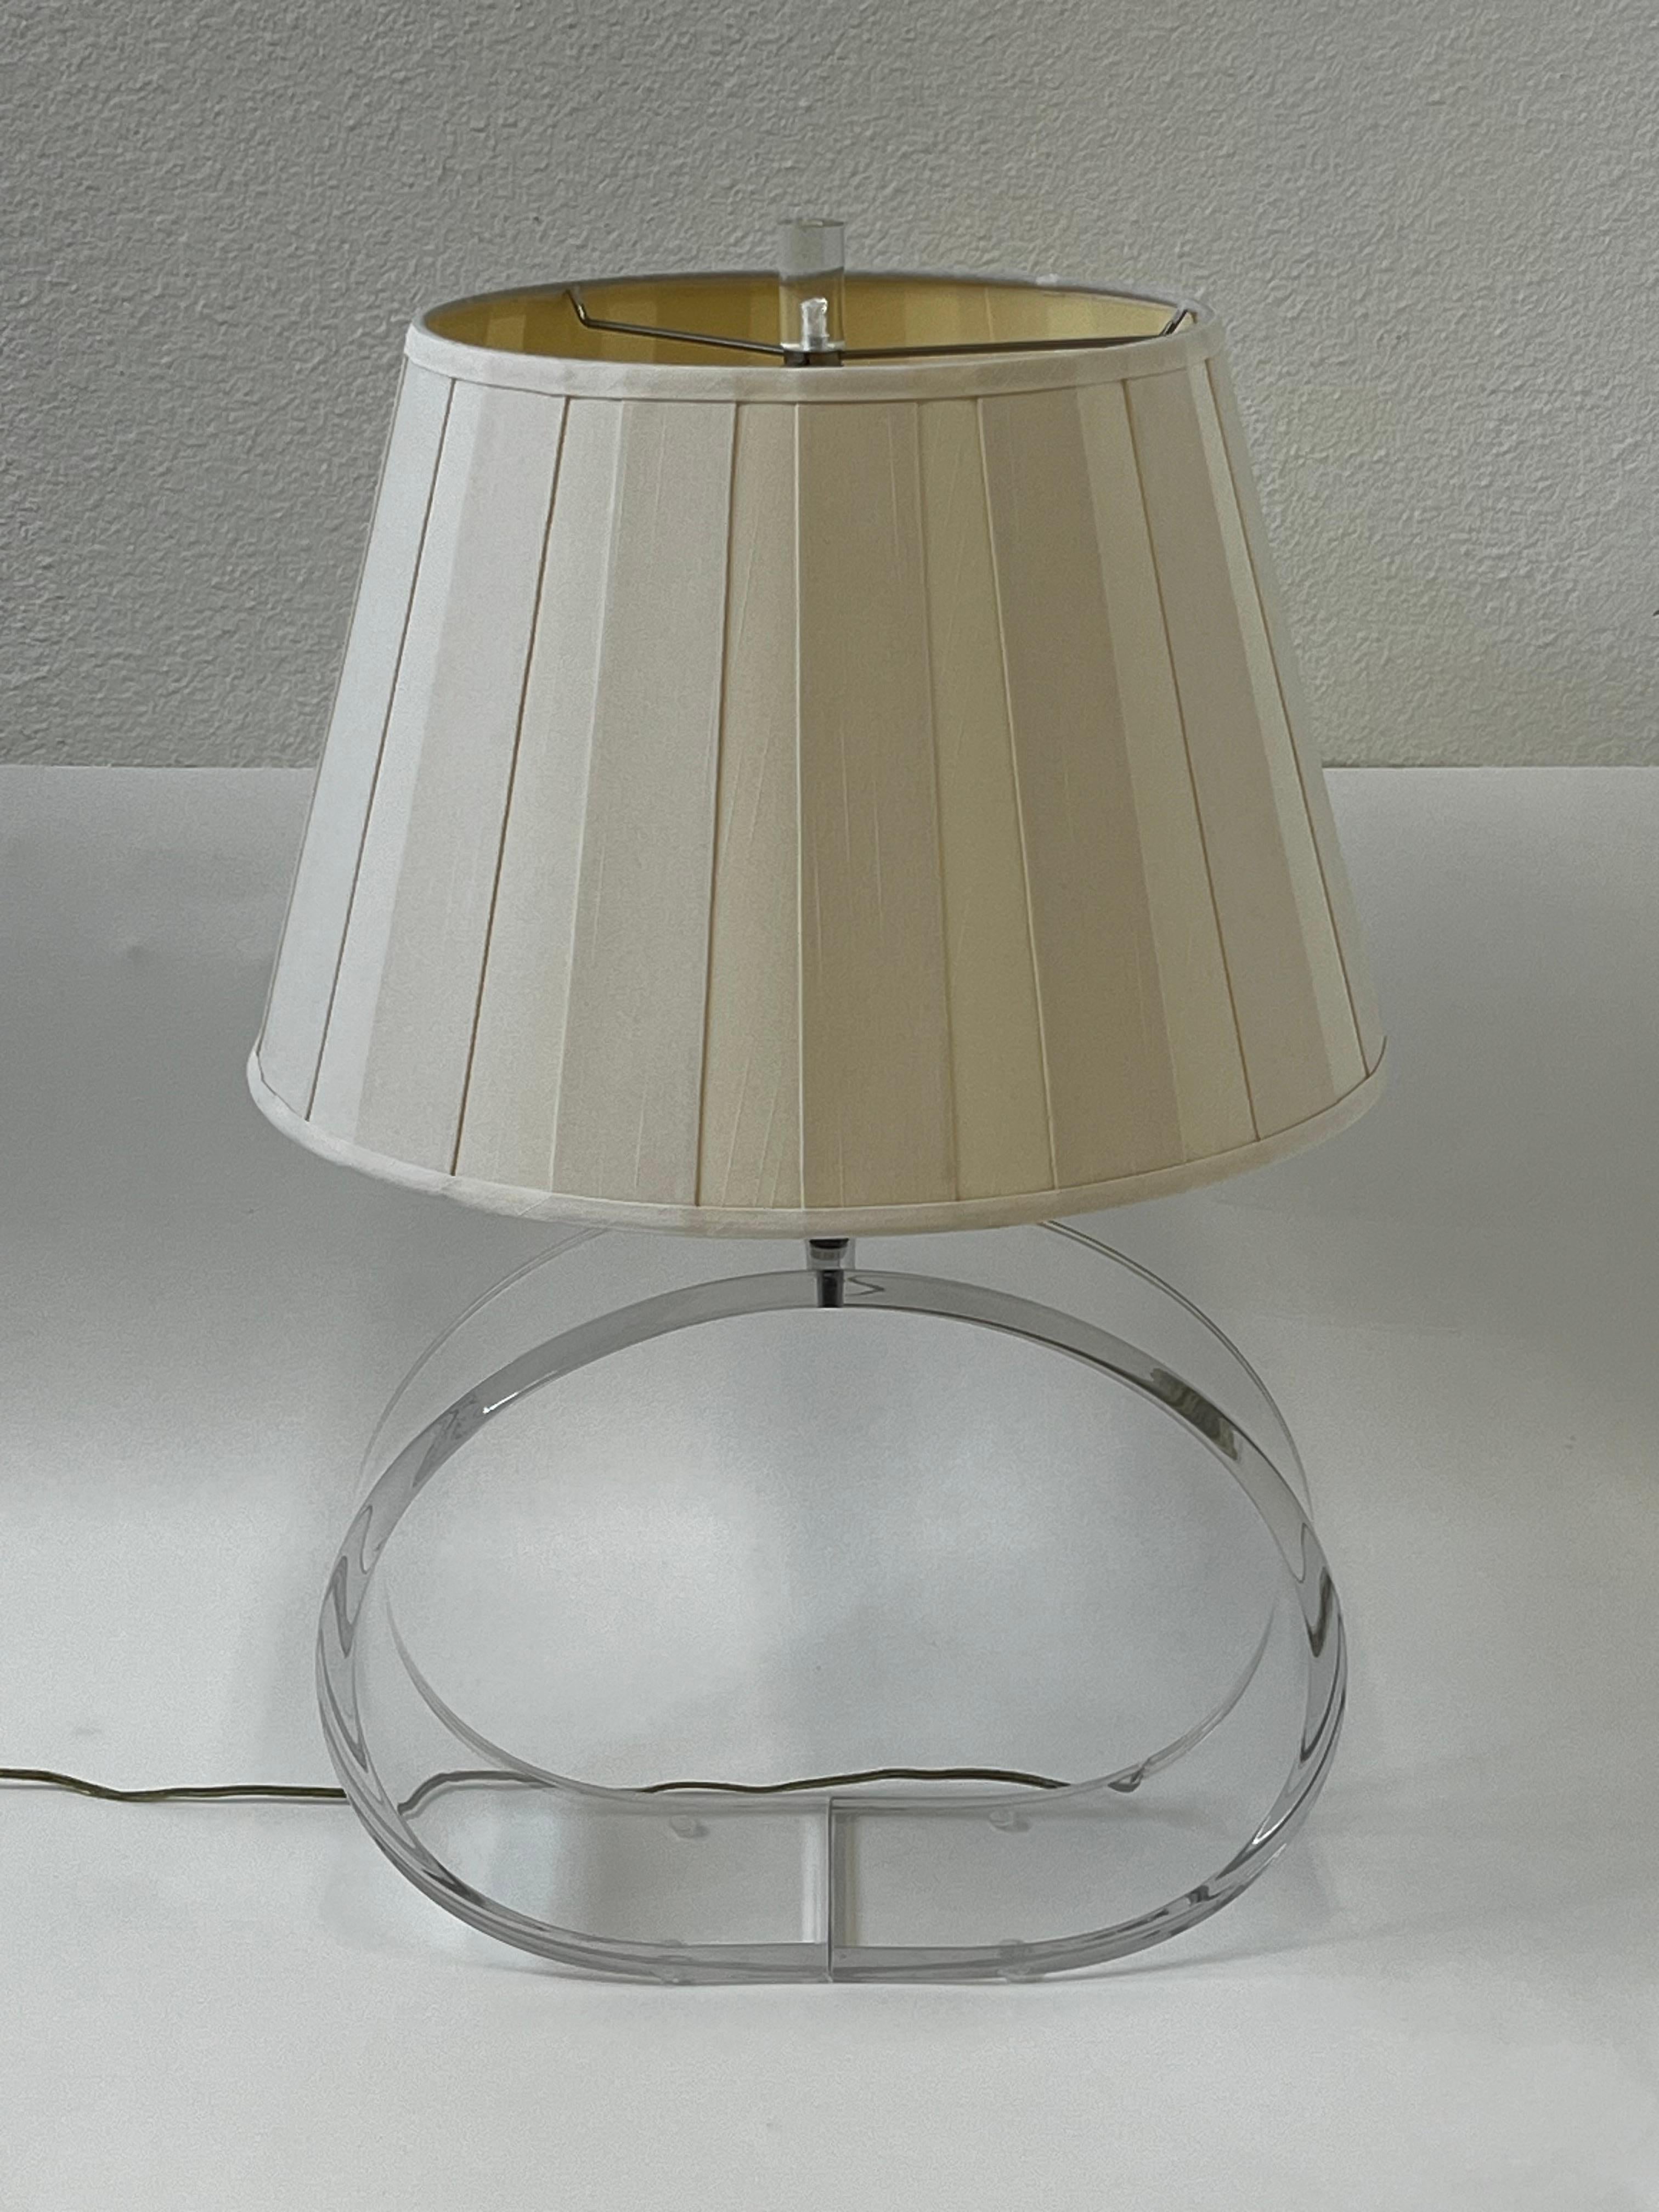 American Clear Lucite and Chrome Table Lamp by Ritts  For Sale